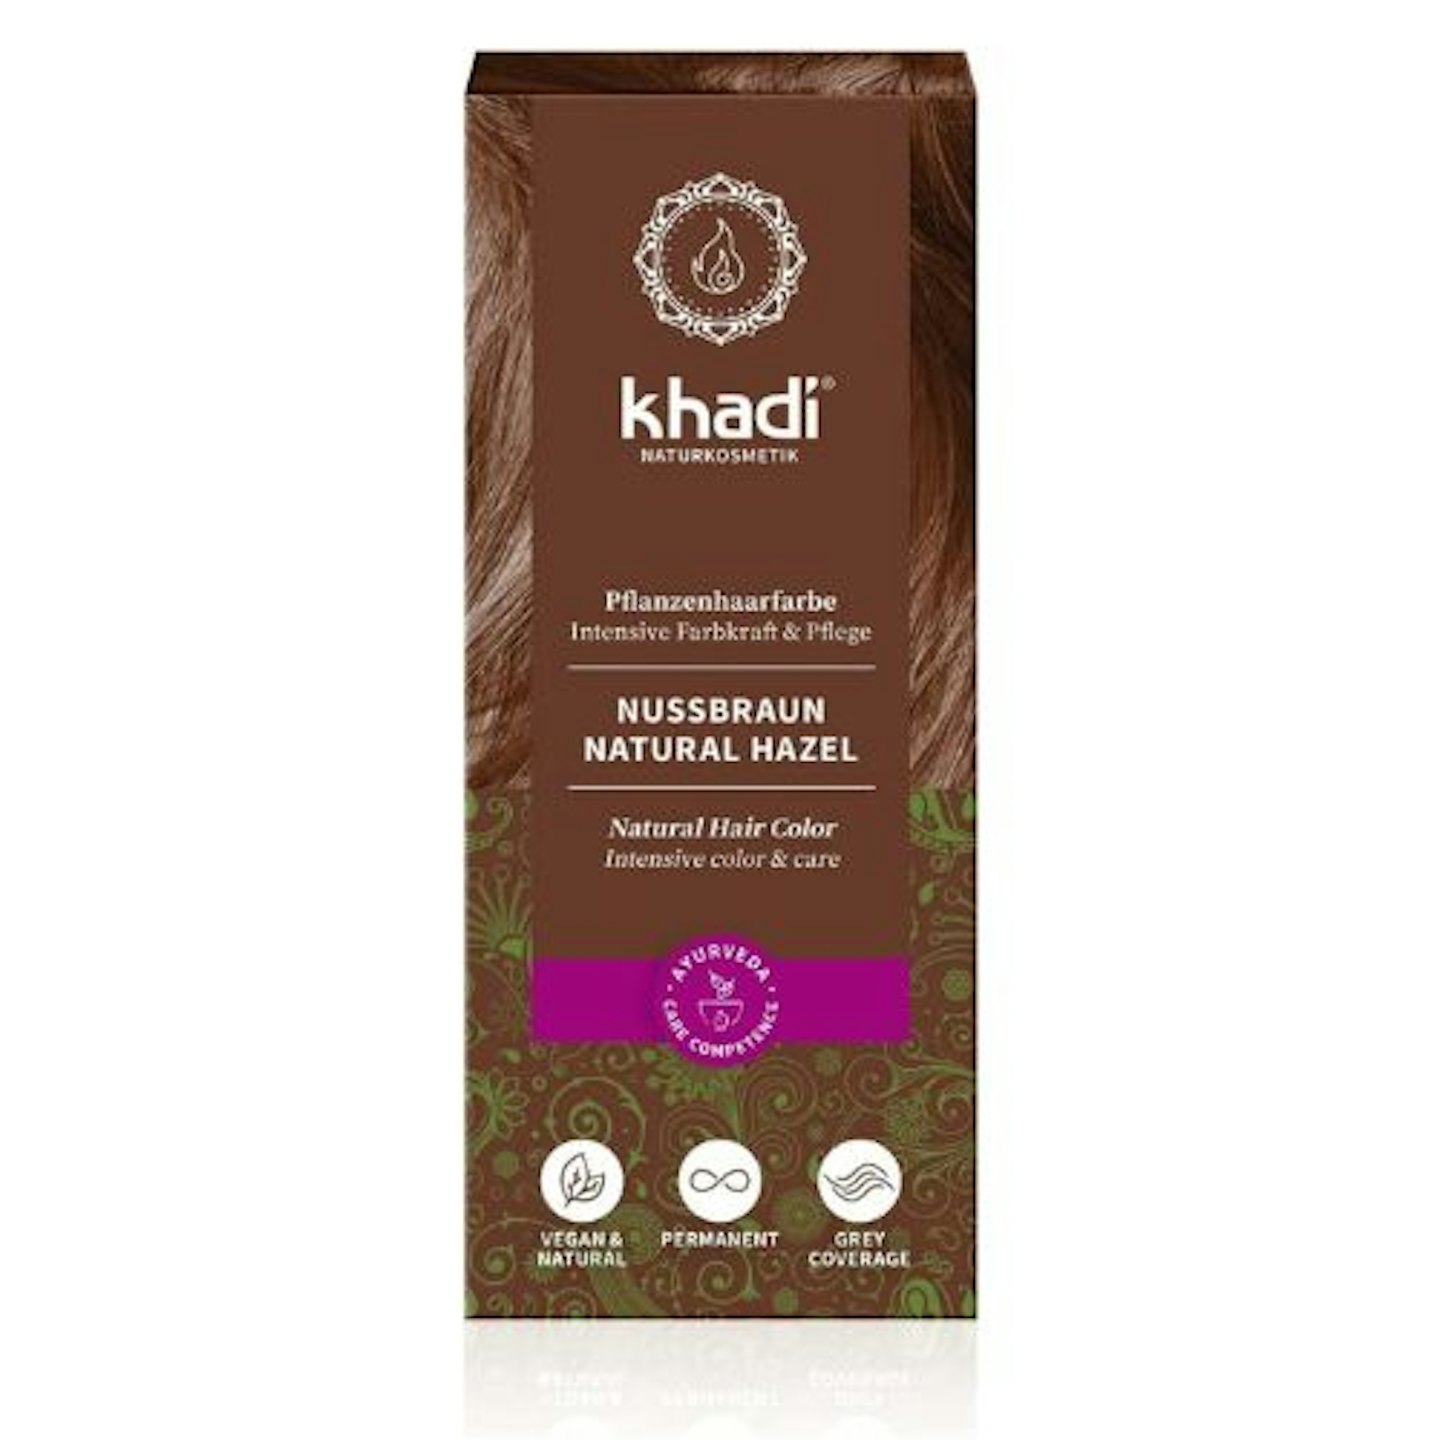 Khadi Plant Hair Dye with Henna and Amla in Nut Brown